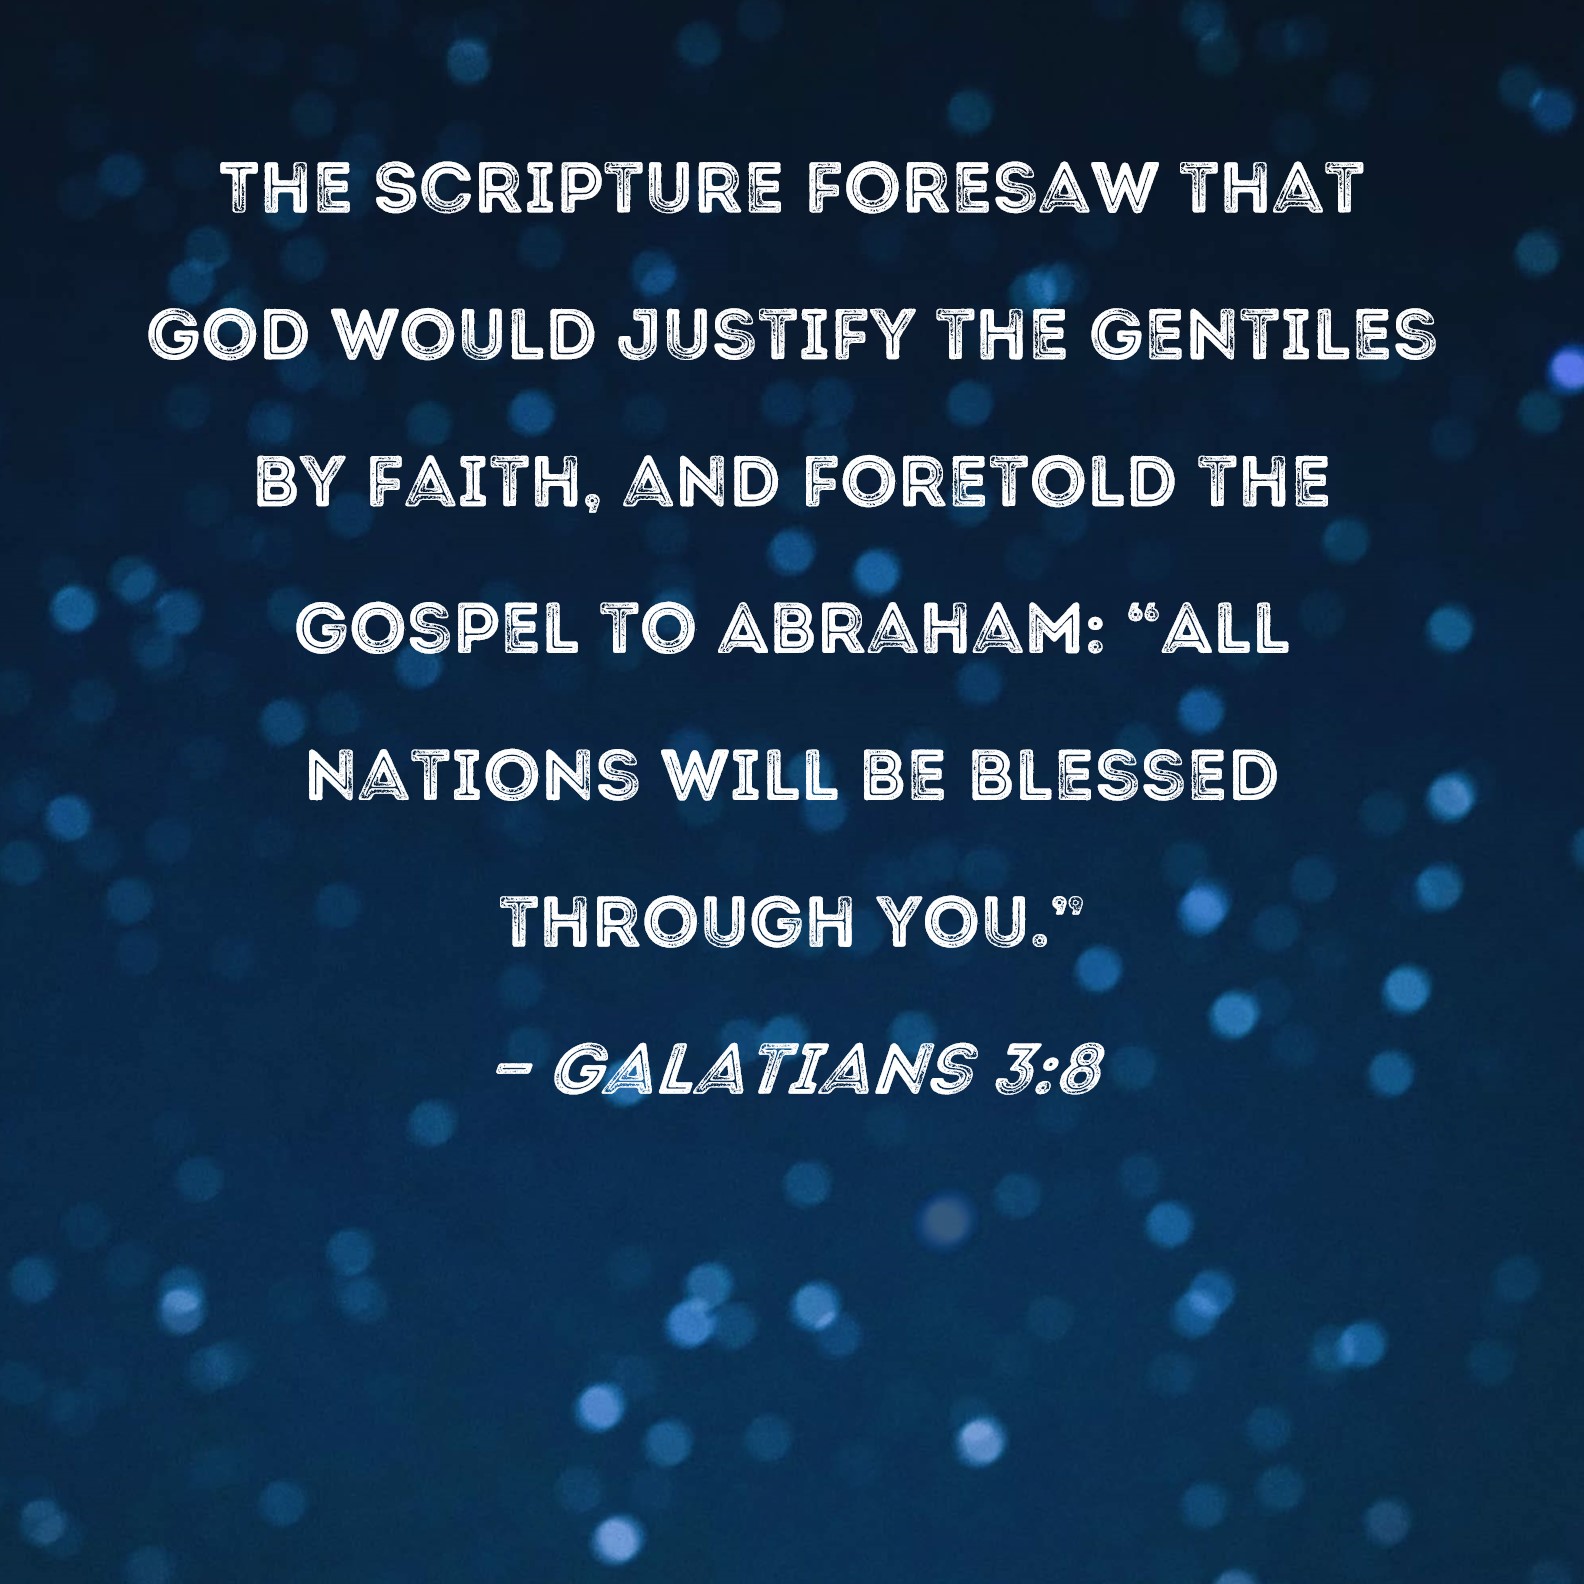 galatians-3-8-the-scripture-foresaw-that-god-would-justify-the-gentiles-by-faith-and-foretold